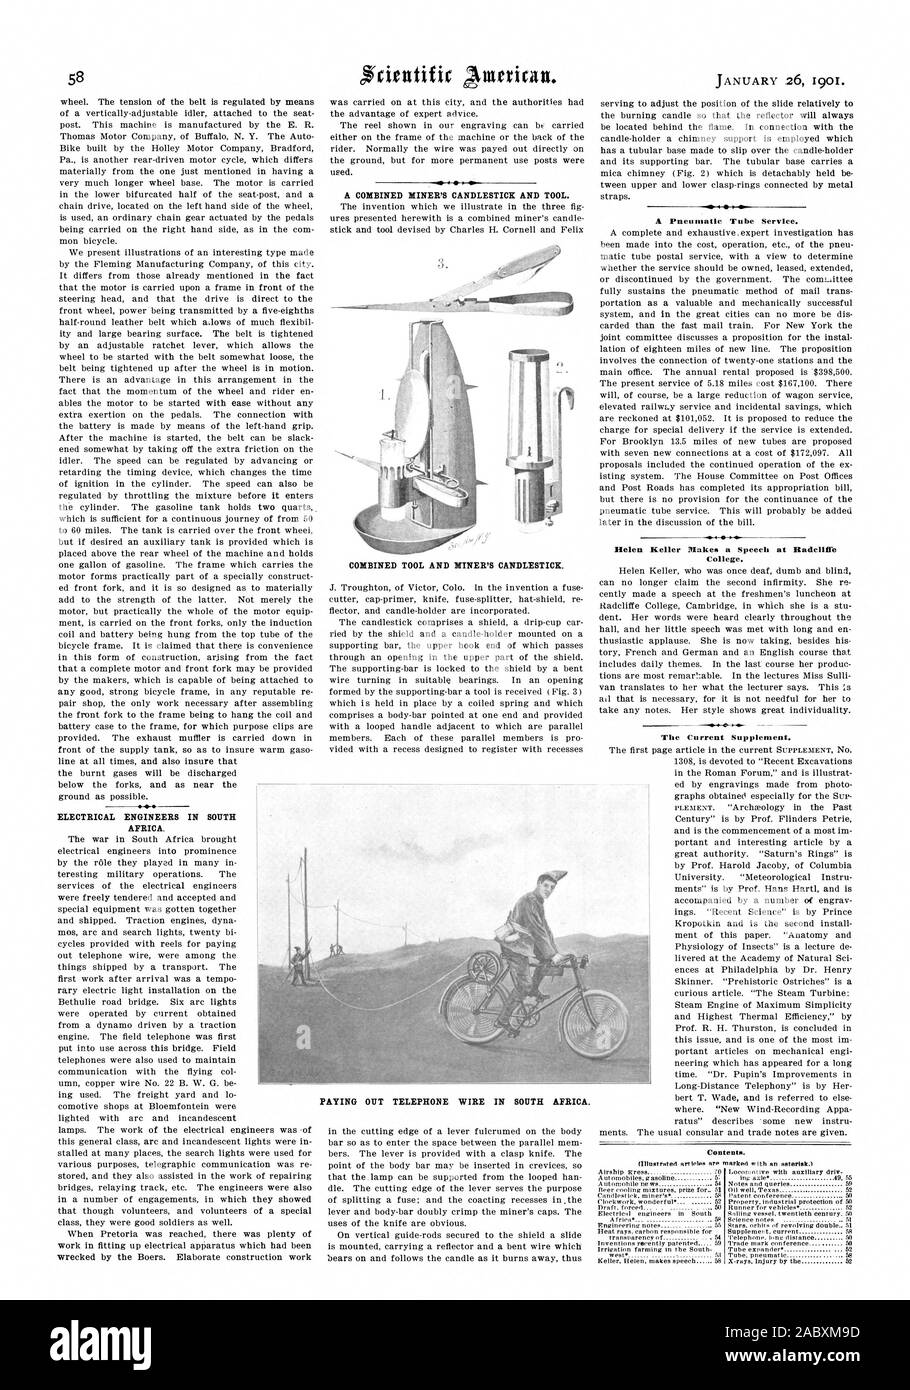 ELECTRICAL ENGINEERS IN SOUTH AFRICA. wrecked by the Boers. Elaborate construction work A COMBINED MINER'S CANDLESTICK AND TOOL. COMBINED TOOL AND MINER'S CANDLESTICK. A Pneumatic Tube Service. Helen Keller Makes a Speech at Radcliffe College. The Current Supplement. Contento., scientific american, 1901-01-26 Stock Photo